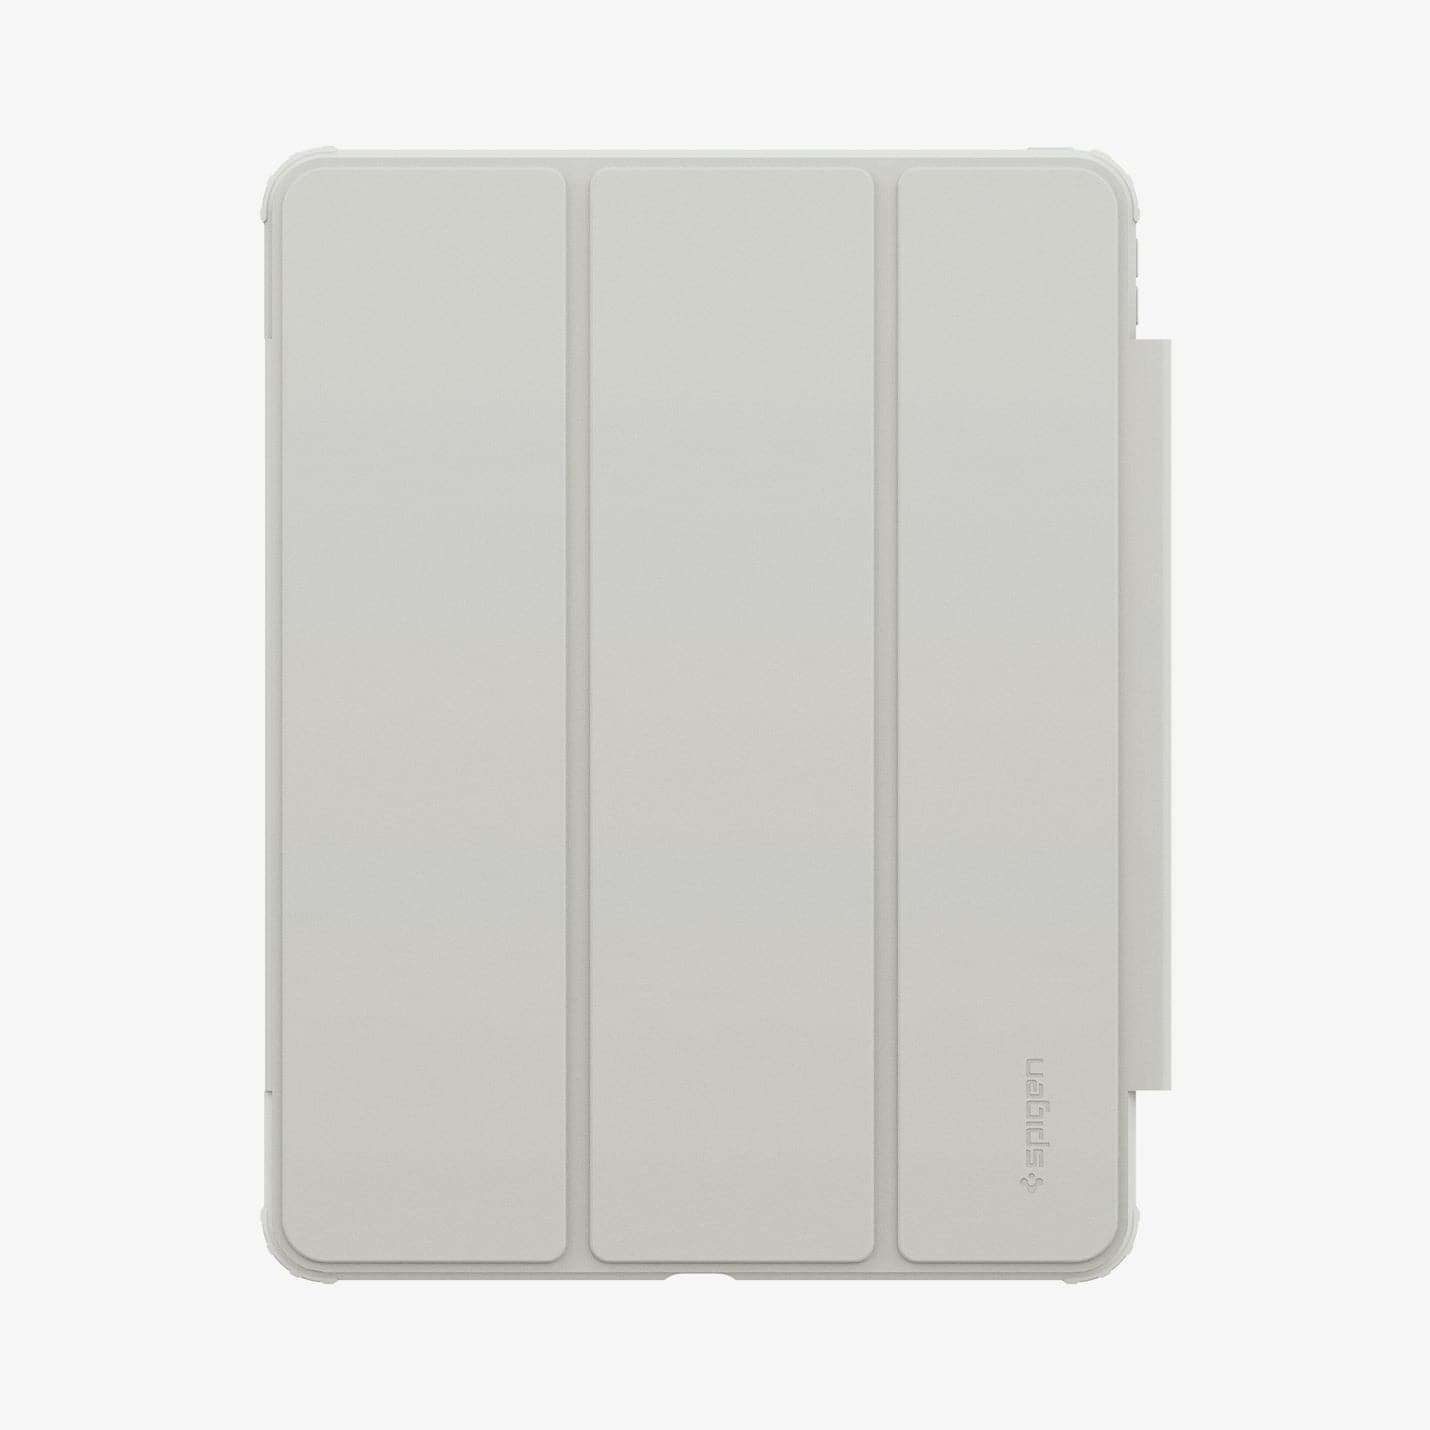  ACS06076 - iPad Pro 12.9" Case Air Skin Pro in gray showing the front